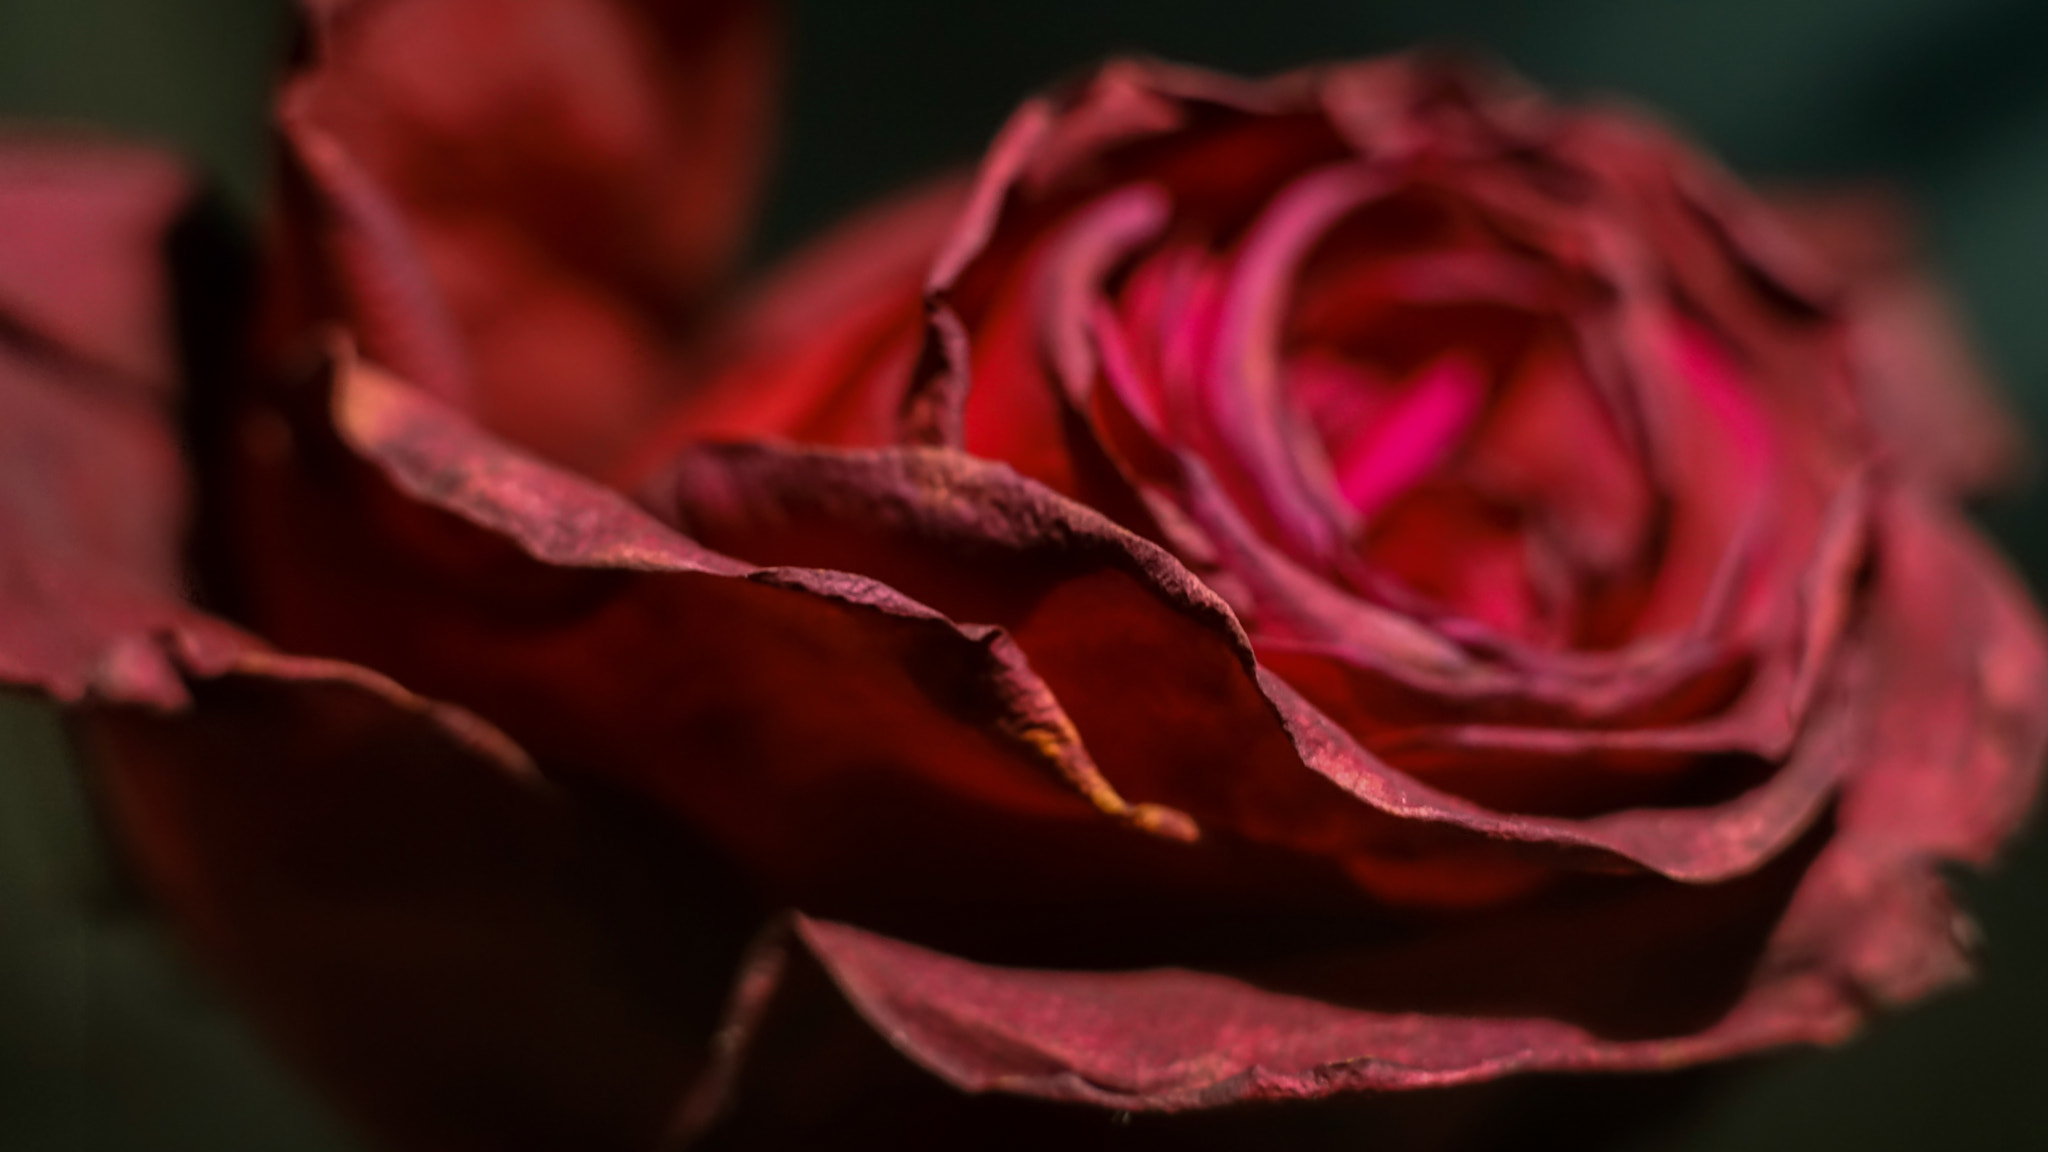 Sony a7 sample photo. If we could stop roses from dying photography